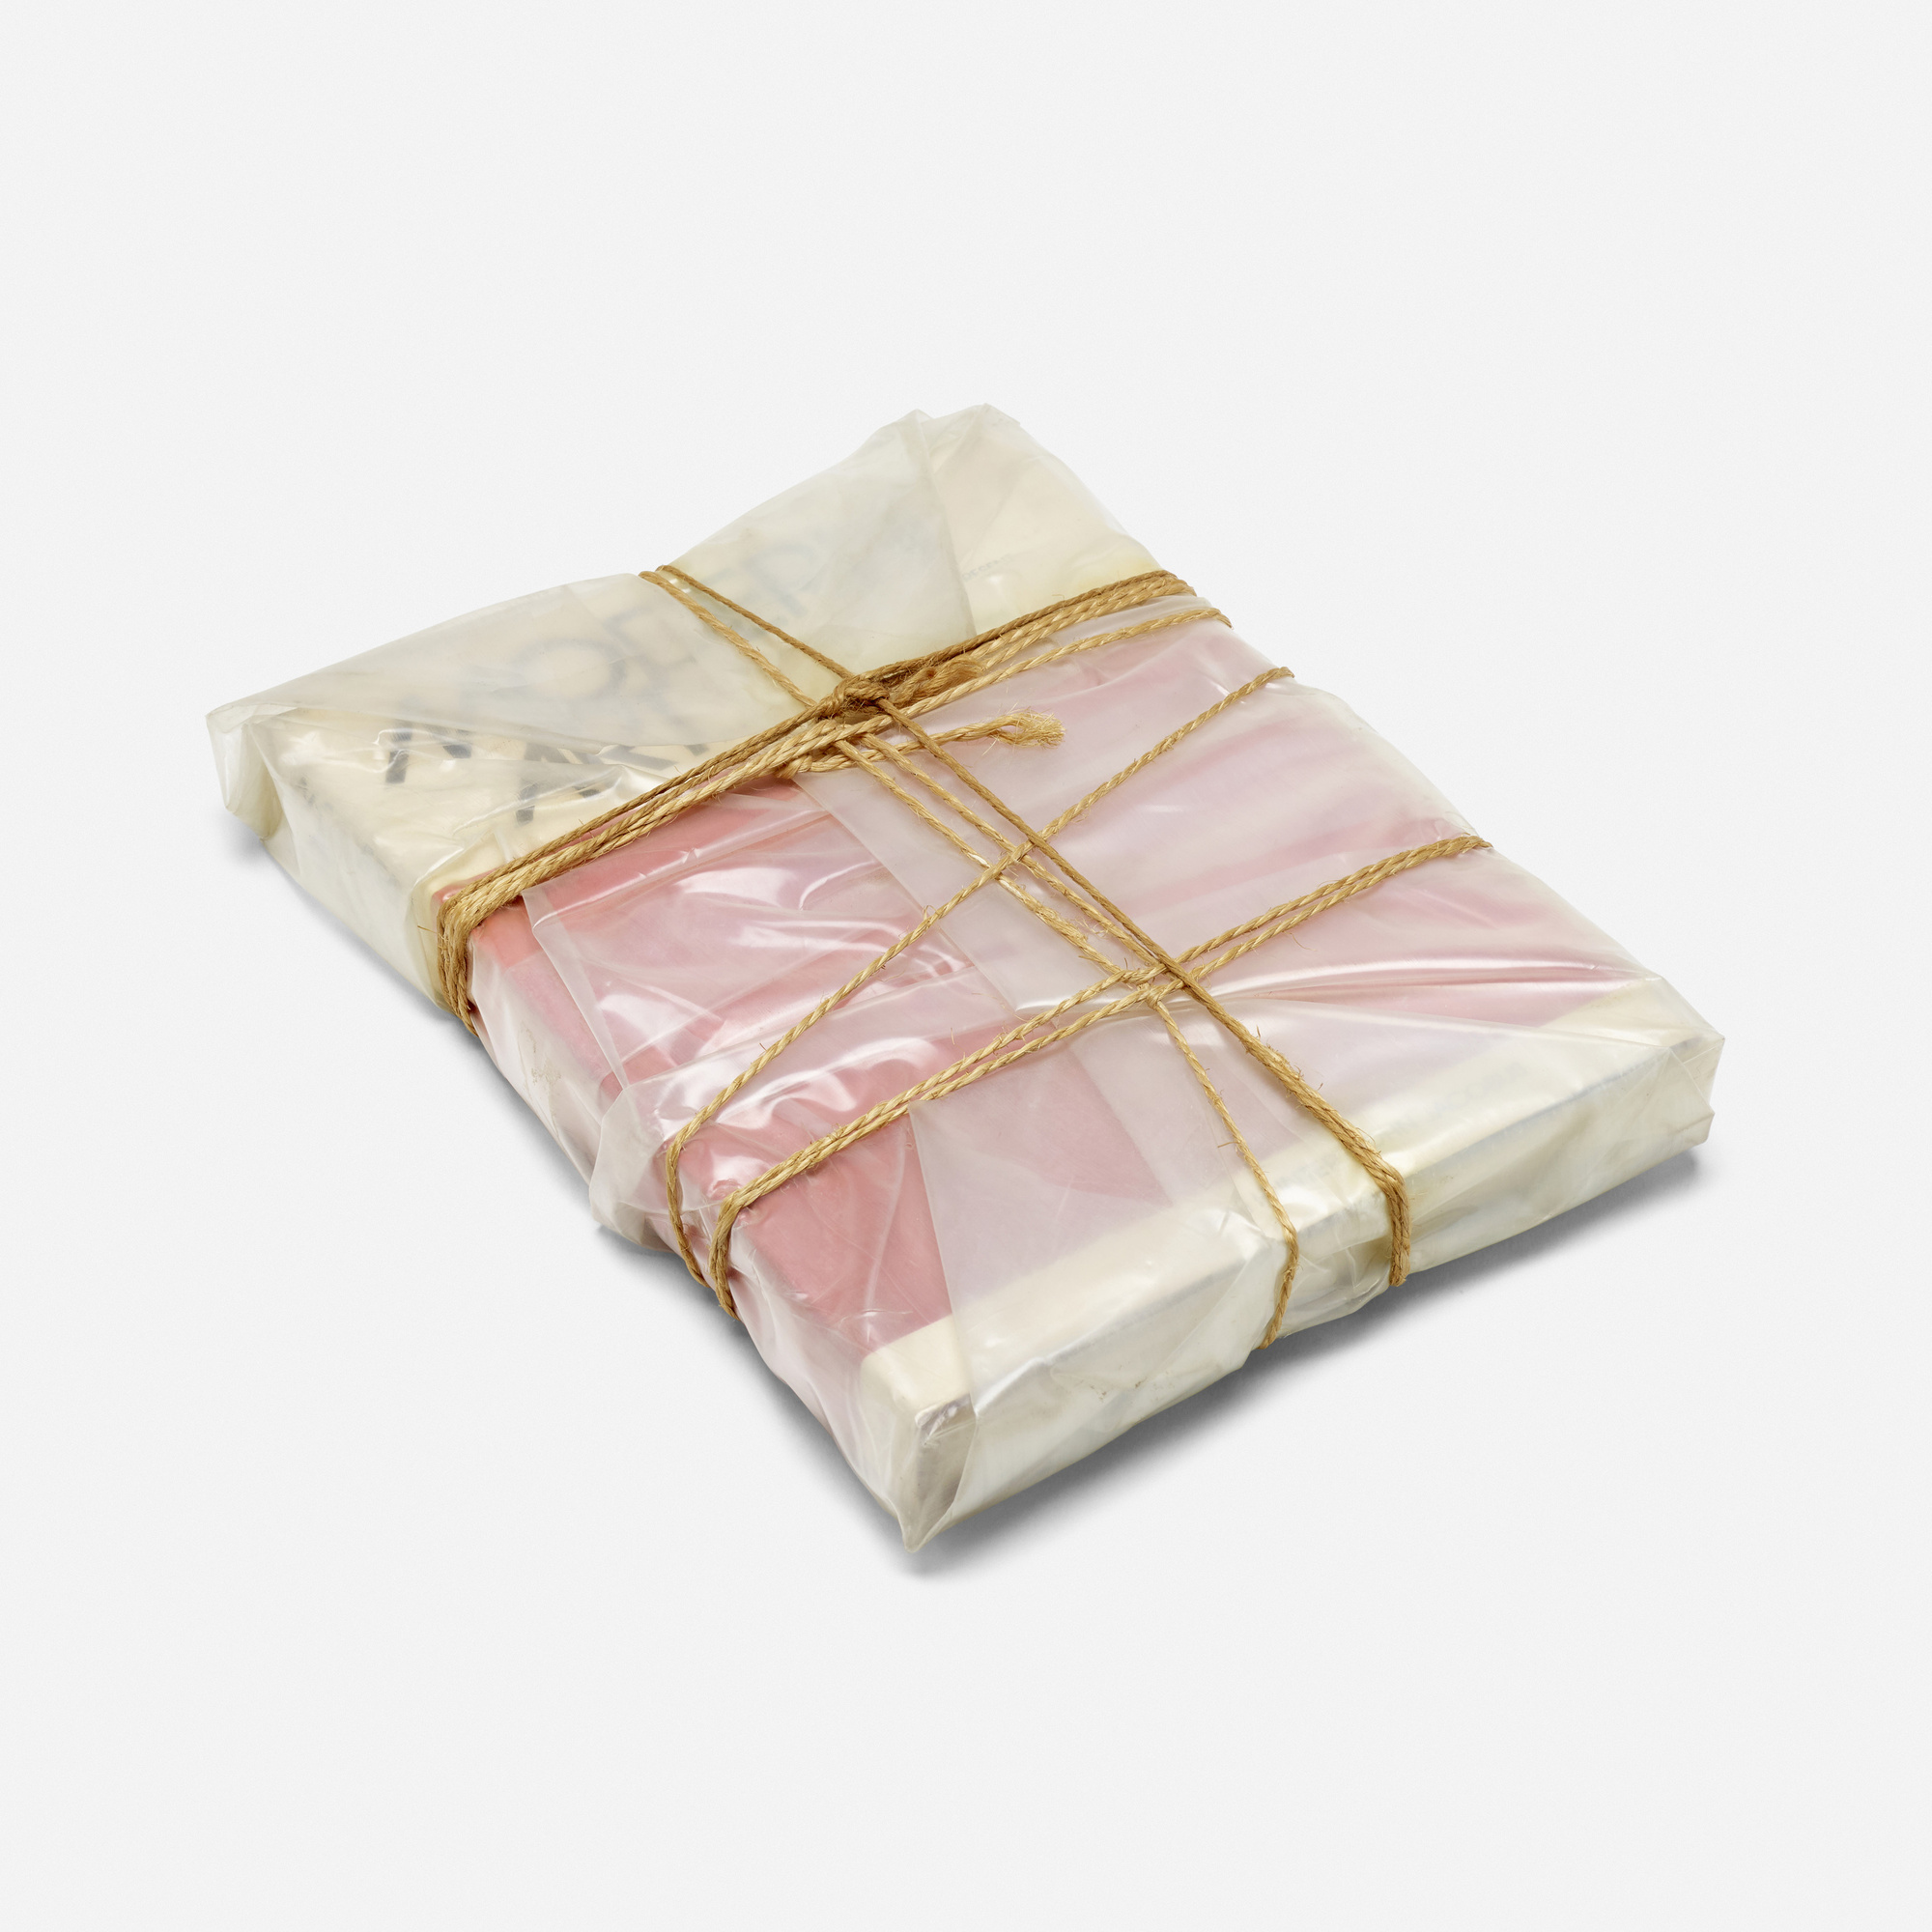 153: CHRISTO, Wrapped Book Modern Art < Prints & Multiples, 11 